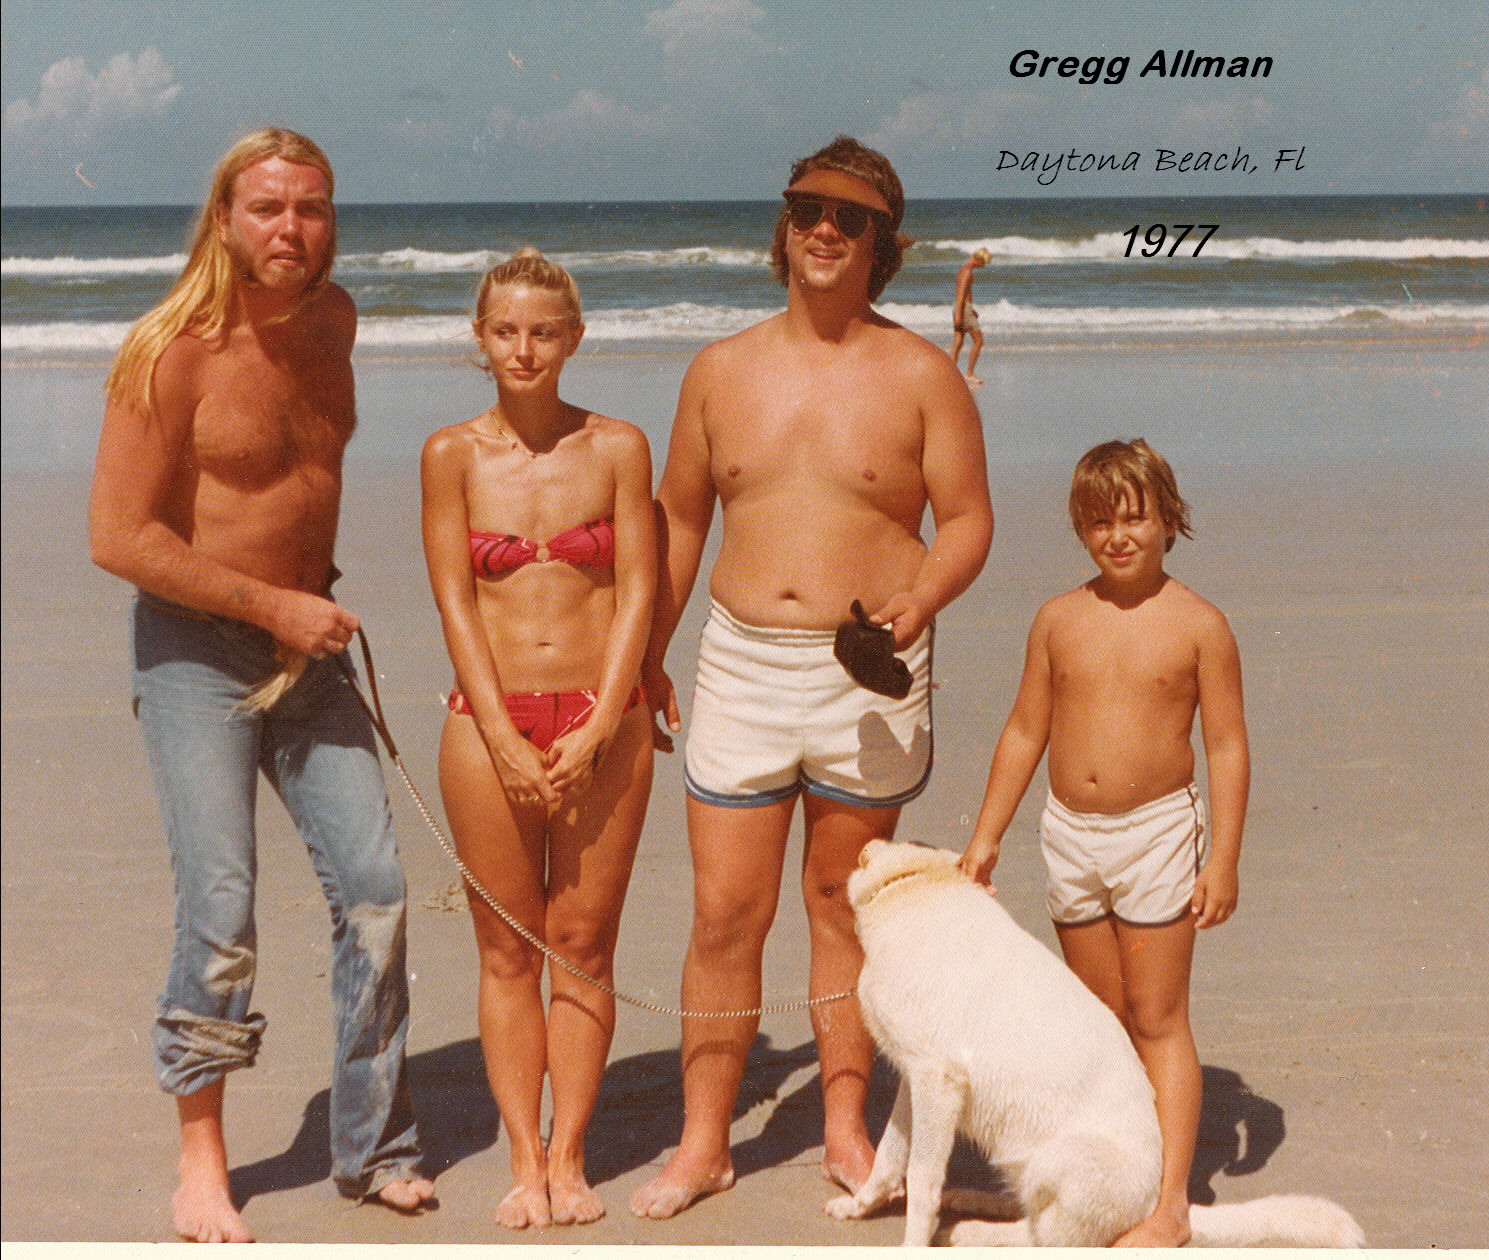 L-R: Gregg Allman, Marsha Stone, Mike Stone, Miss Mac (the dog), Mickey Stone.  This was taken 7/19/77 on Daytona Beach, FL.  Gregg only agreed to be in the picture if we would let him hold the leash for our dog.  He had a solid black German Shepherd at the time.  